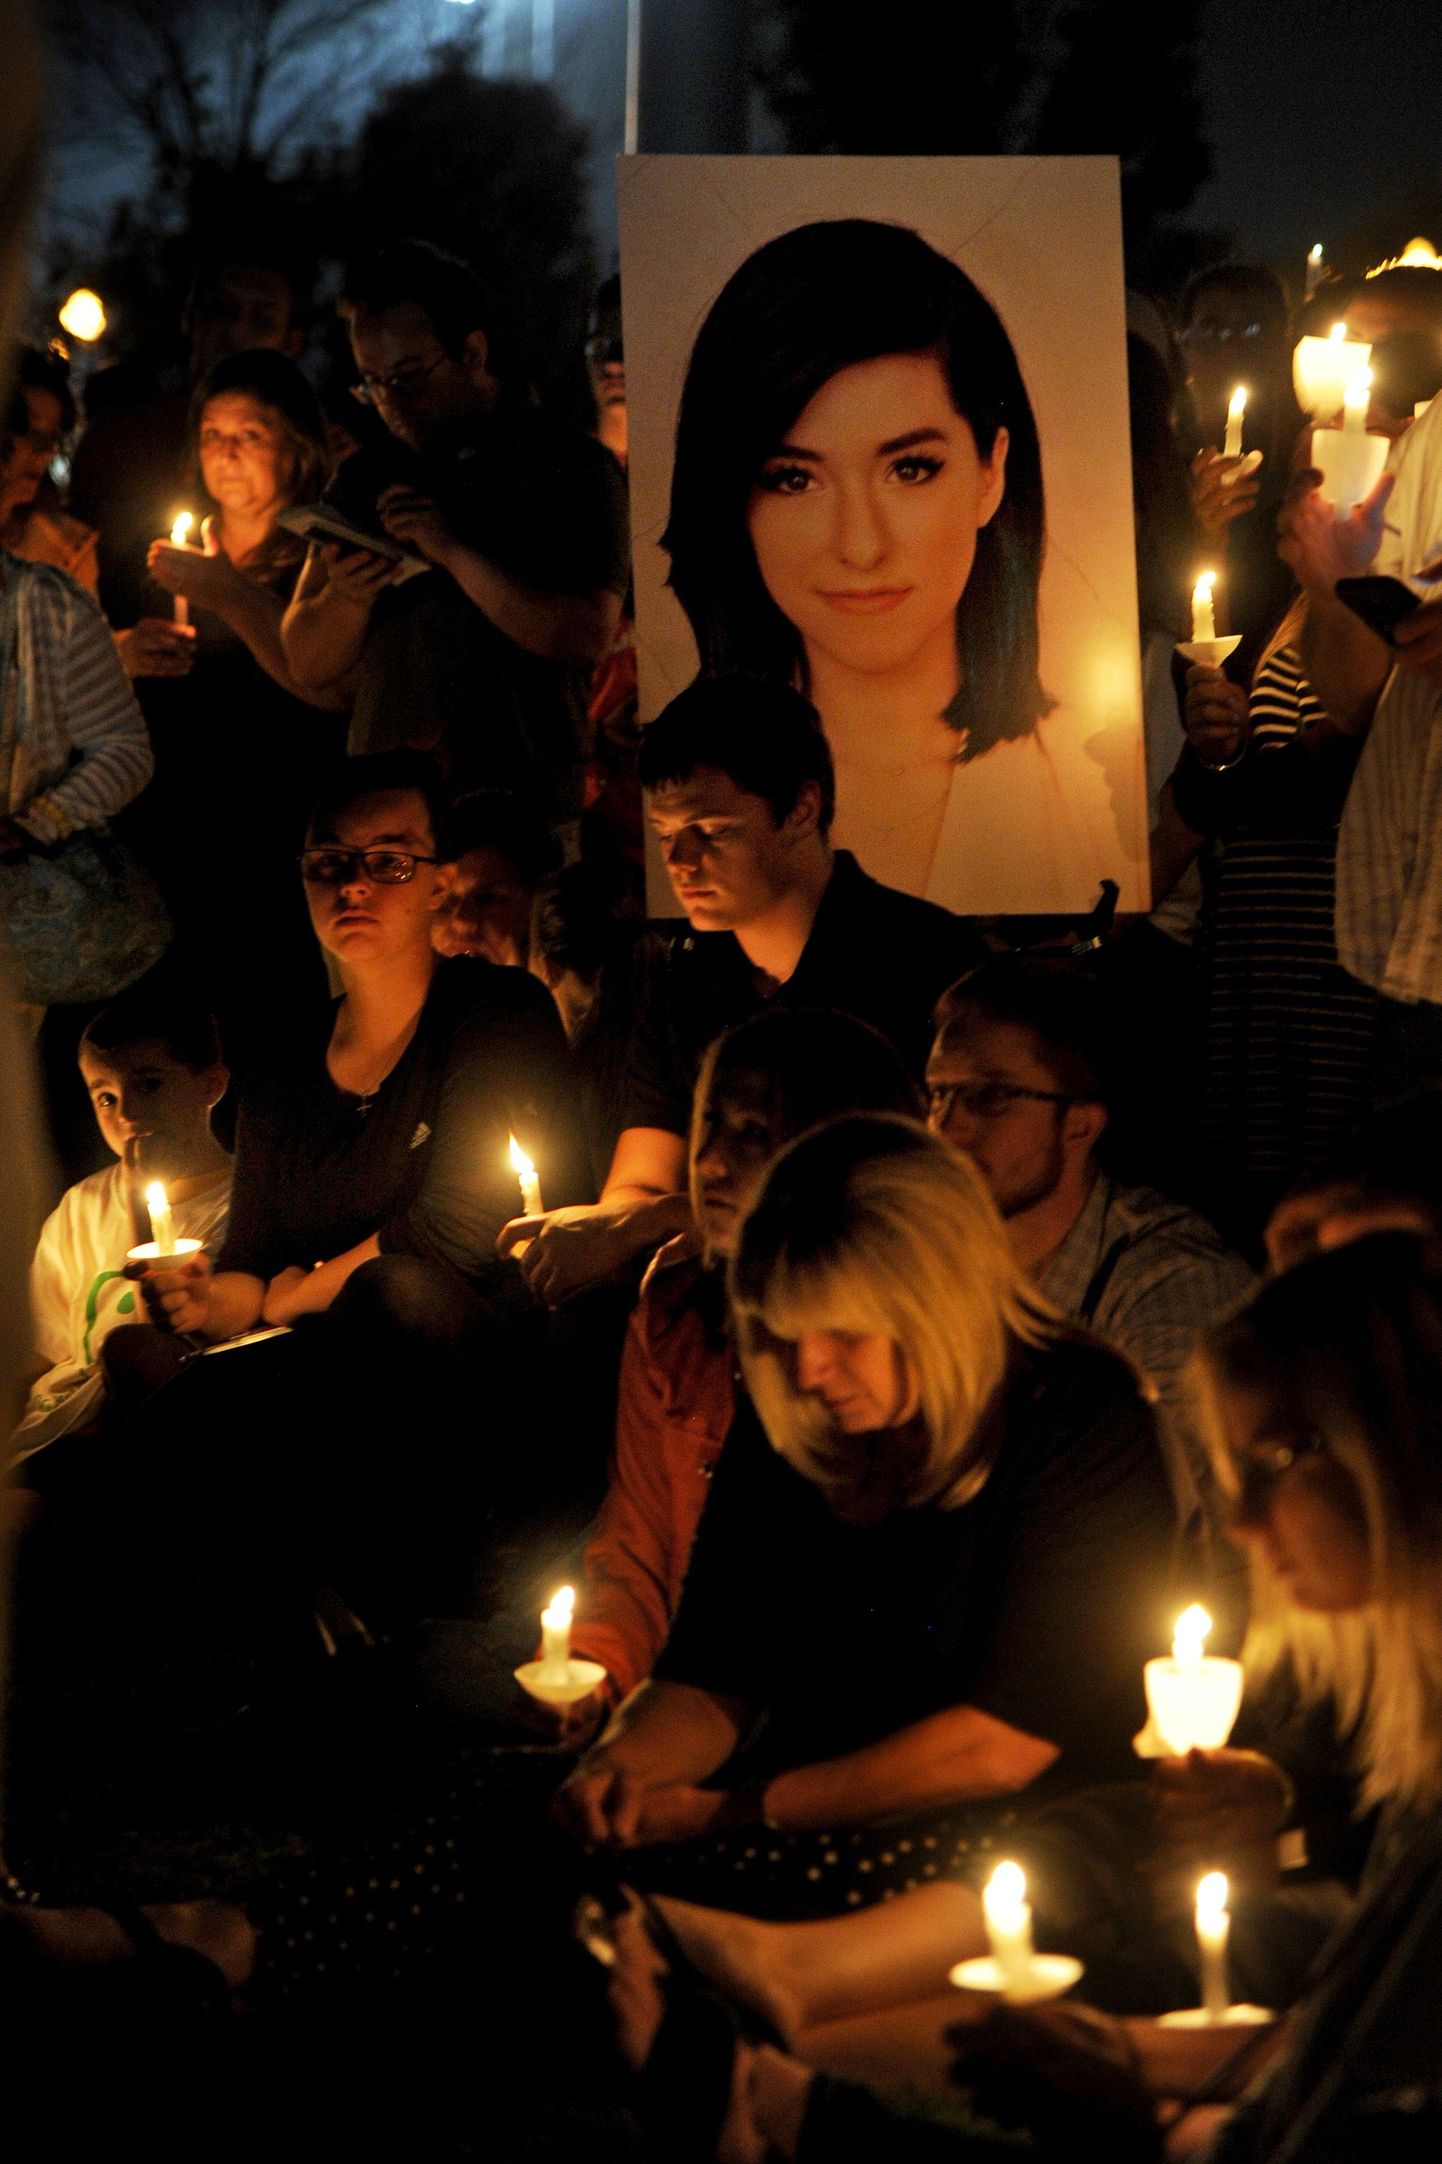 A photo of Christina Grimmie, 22, is displayed as participants hold a vigil to honor the singer killed Friday night in Orlando, Fla., on Monday, June 13, 2016, in Evesham Township, N.J. Hundreds of people have gathered at the candlelight vigil in the New Jersey hometown of the singer who was gunned down after a Florida concert. Grimmie was killed Friday night as she signed autographs after a show in Orlando. (Tom Gralish/The Philadelphia Inquirer via AP)  PHIX OUT; TV OUT; MAGS OUT; NEWARK OUT; MANDATORY CREDIT